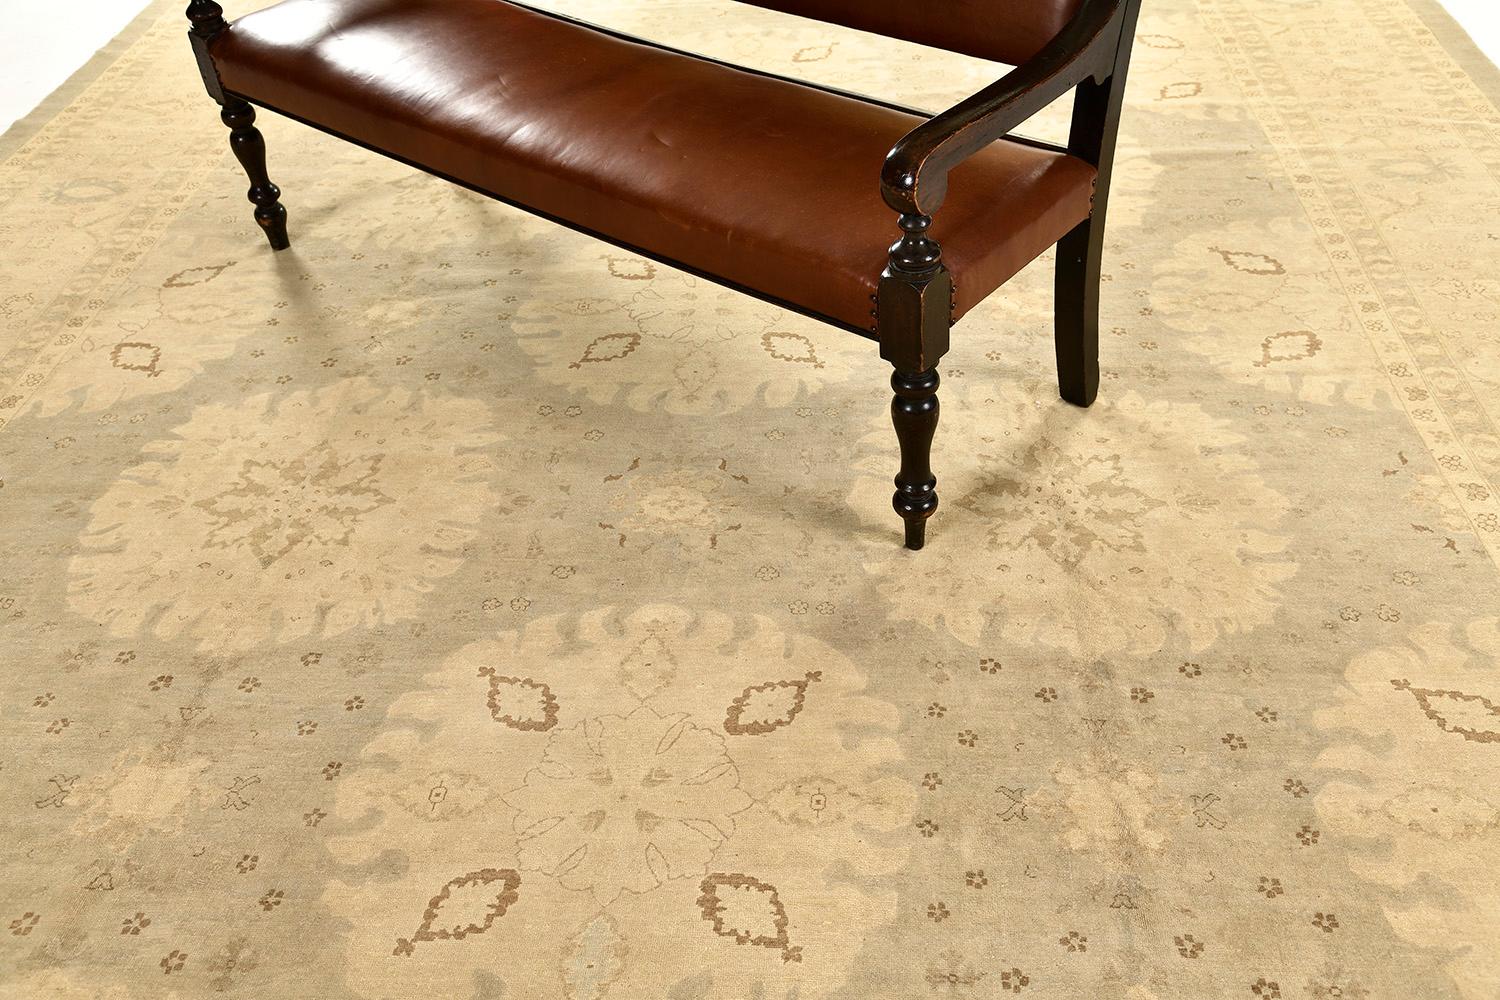 Everybody deserves to have a grandiose entrance with this timeless beauty of Bakhtiari Rug. A hand-spun wool Bakhtiari Rug is known for its durability and it is perfect at your doorsteps. A great welcome for your guests is absolutely an excellent